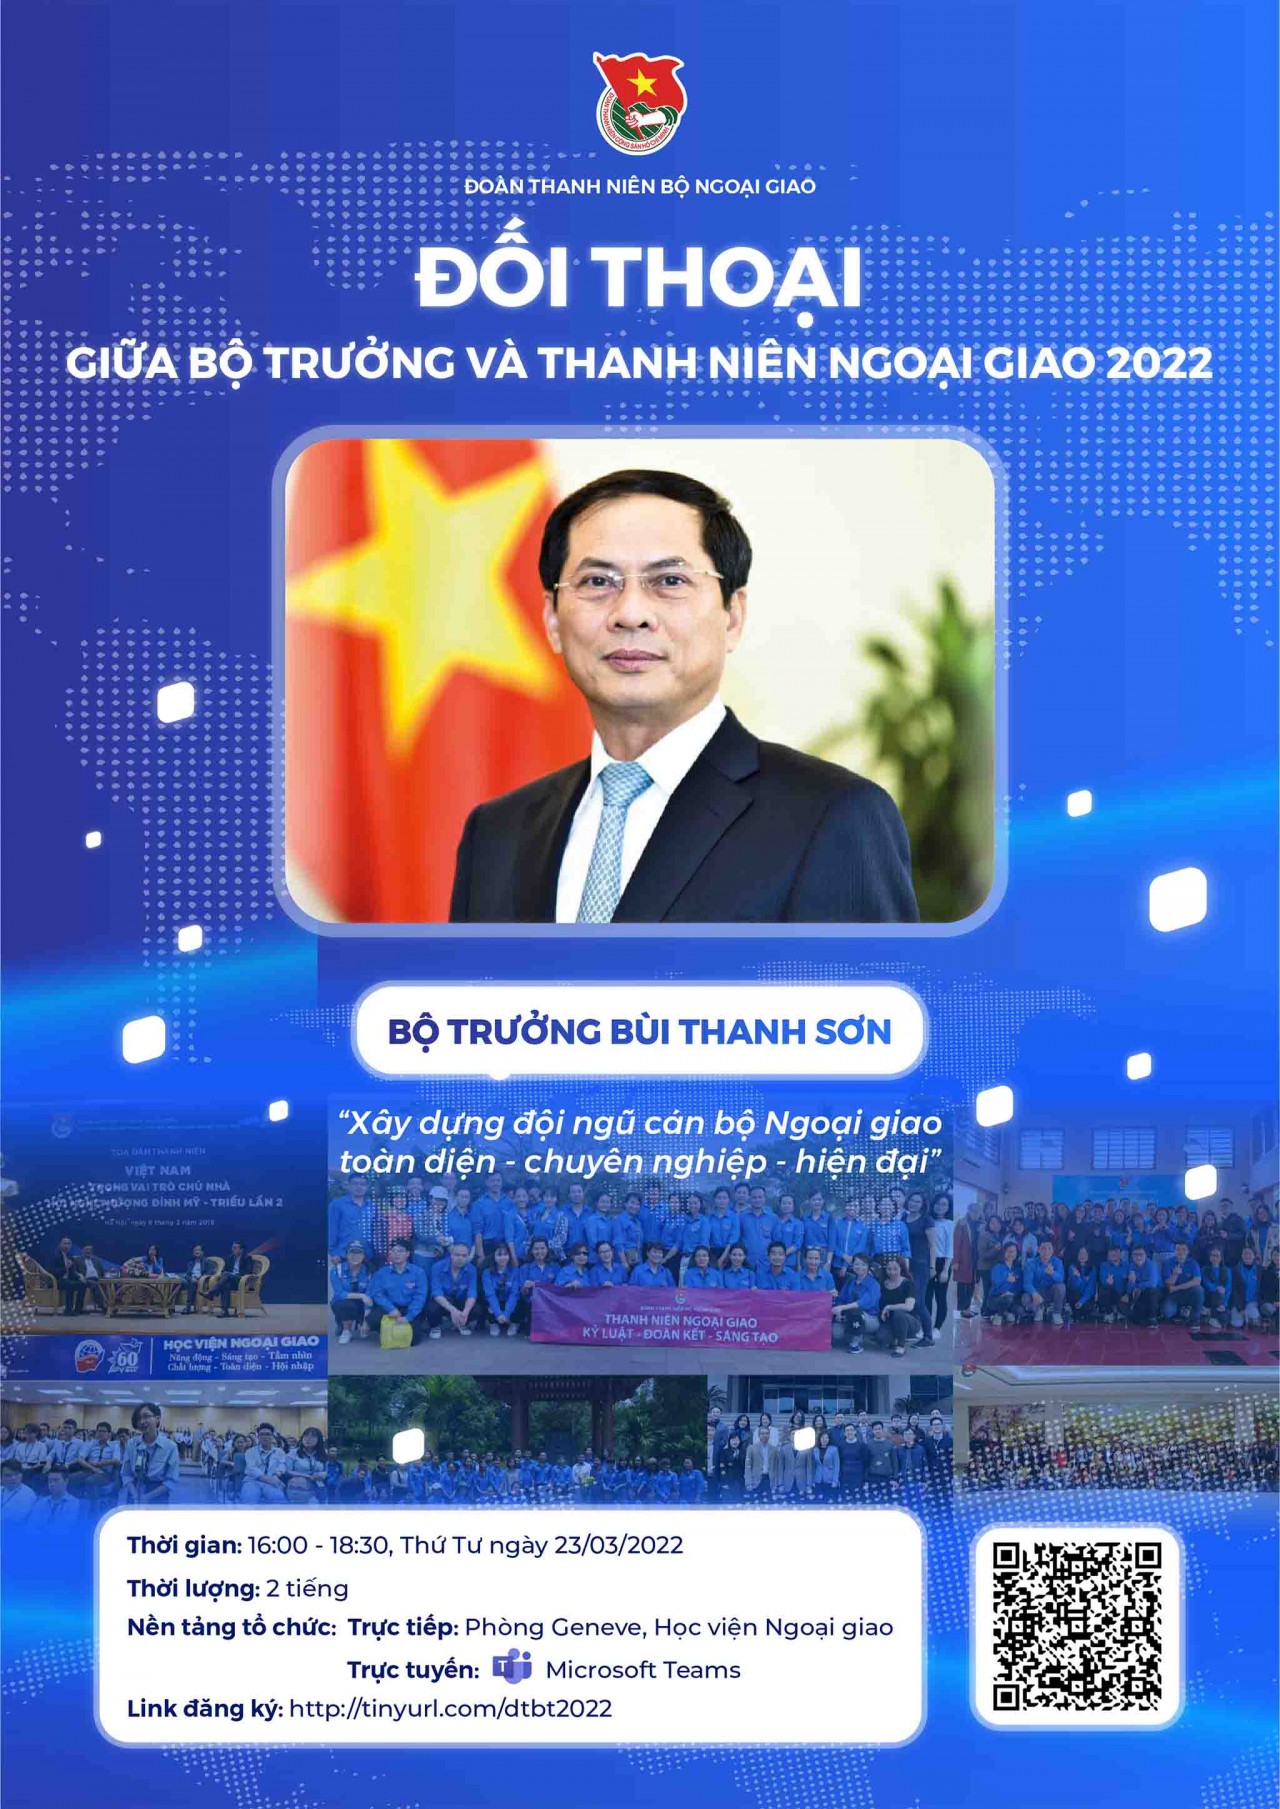 Tomorrow, Foreign Minister Bui Thanh Son has a dialogue with young diplomats